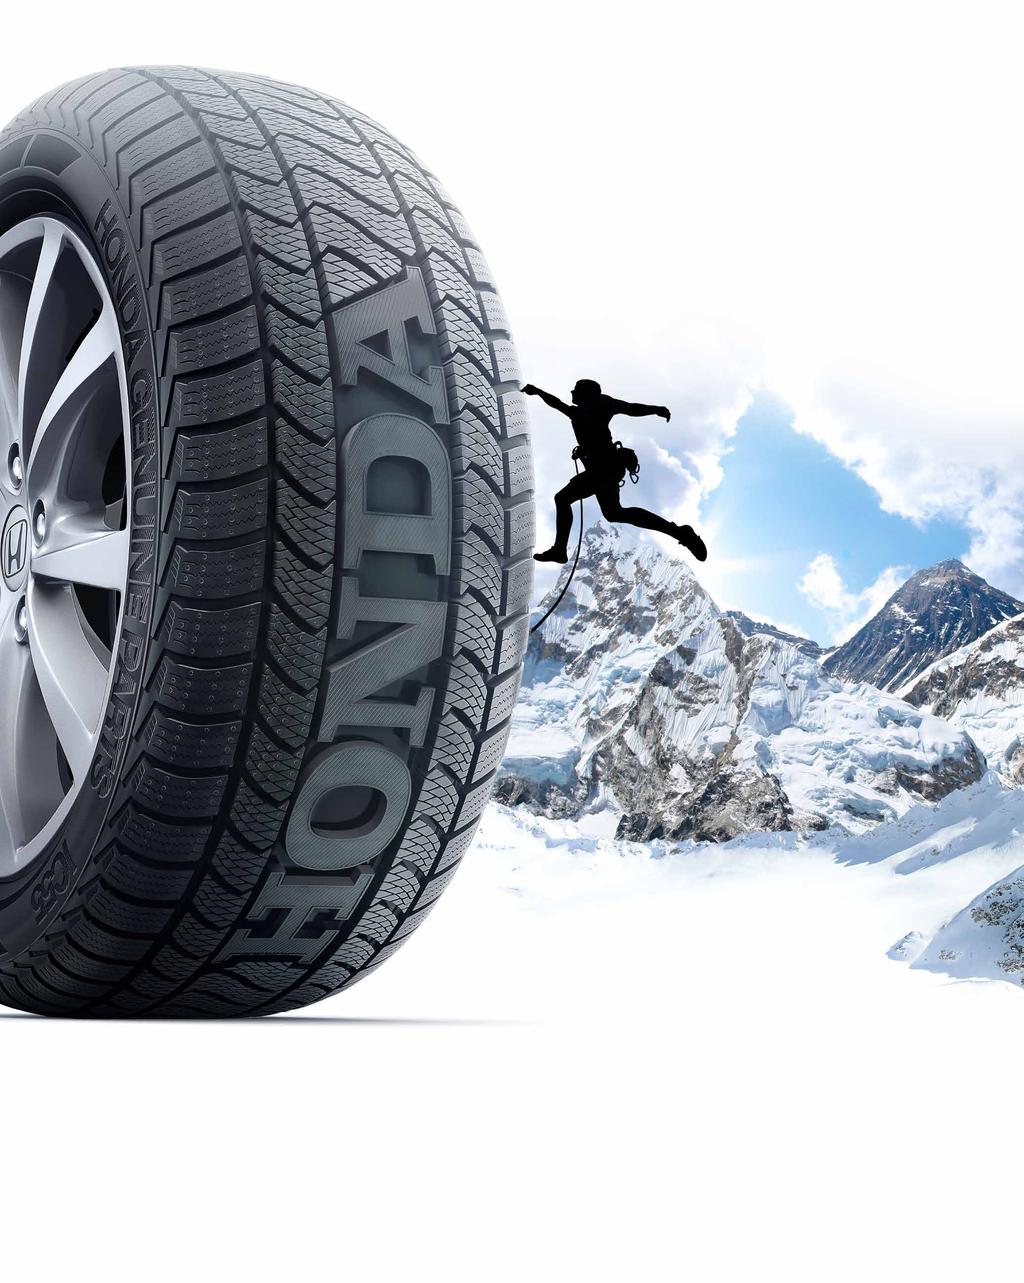 Get a grip on winter HONDA WINTER TYRES AND RIMS HONDA GENUINE PARTS High quality, better results, longer lasting *This image is purely